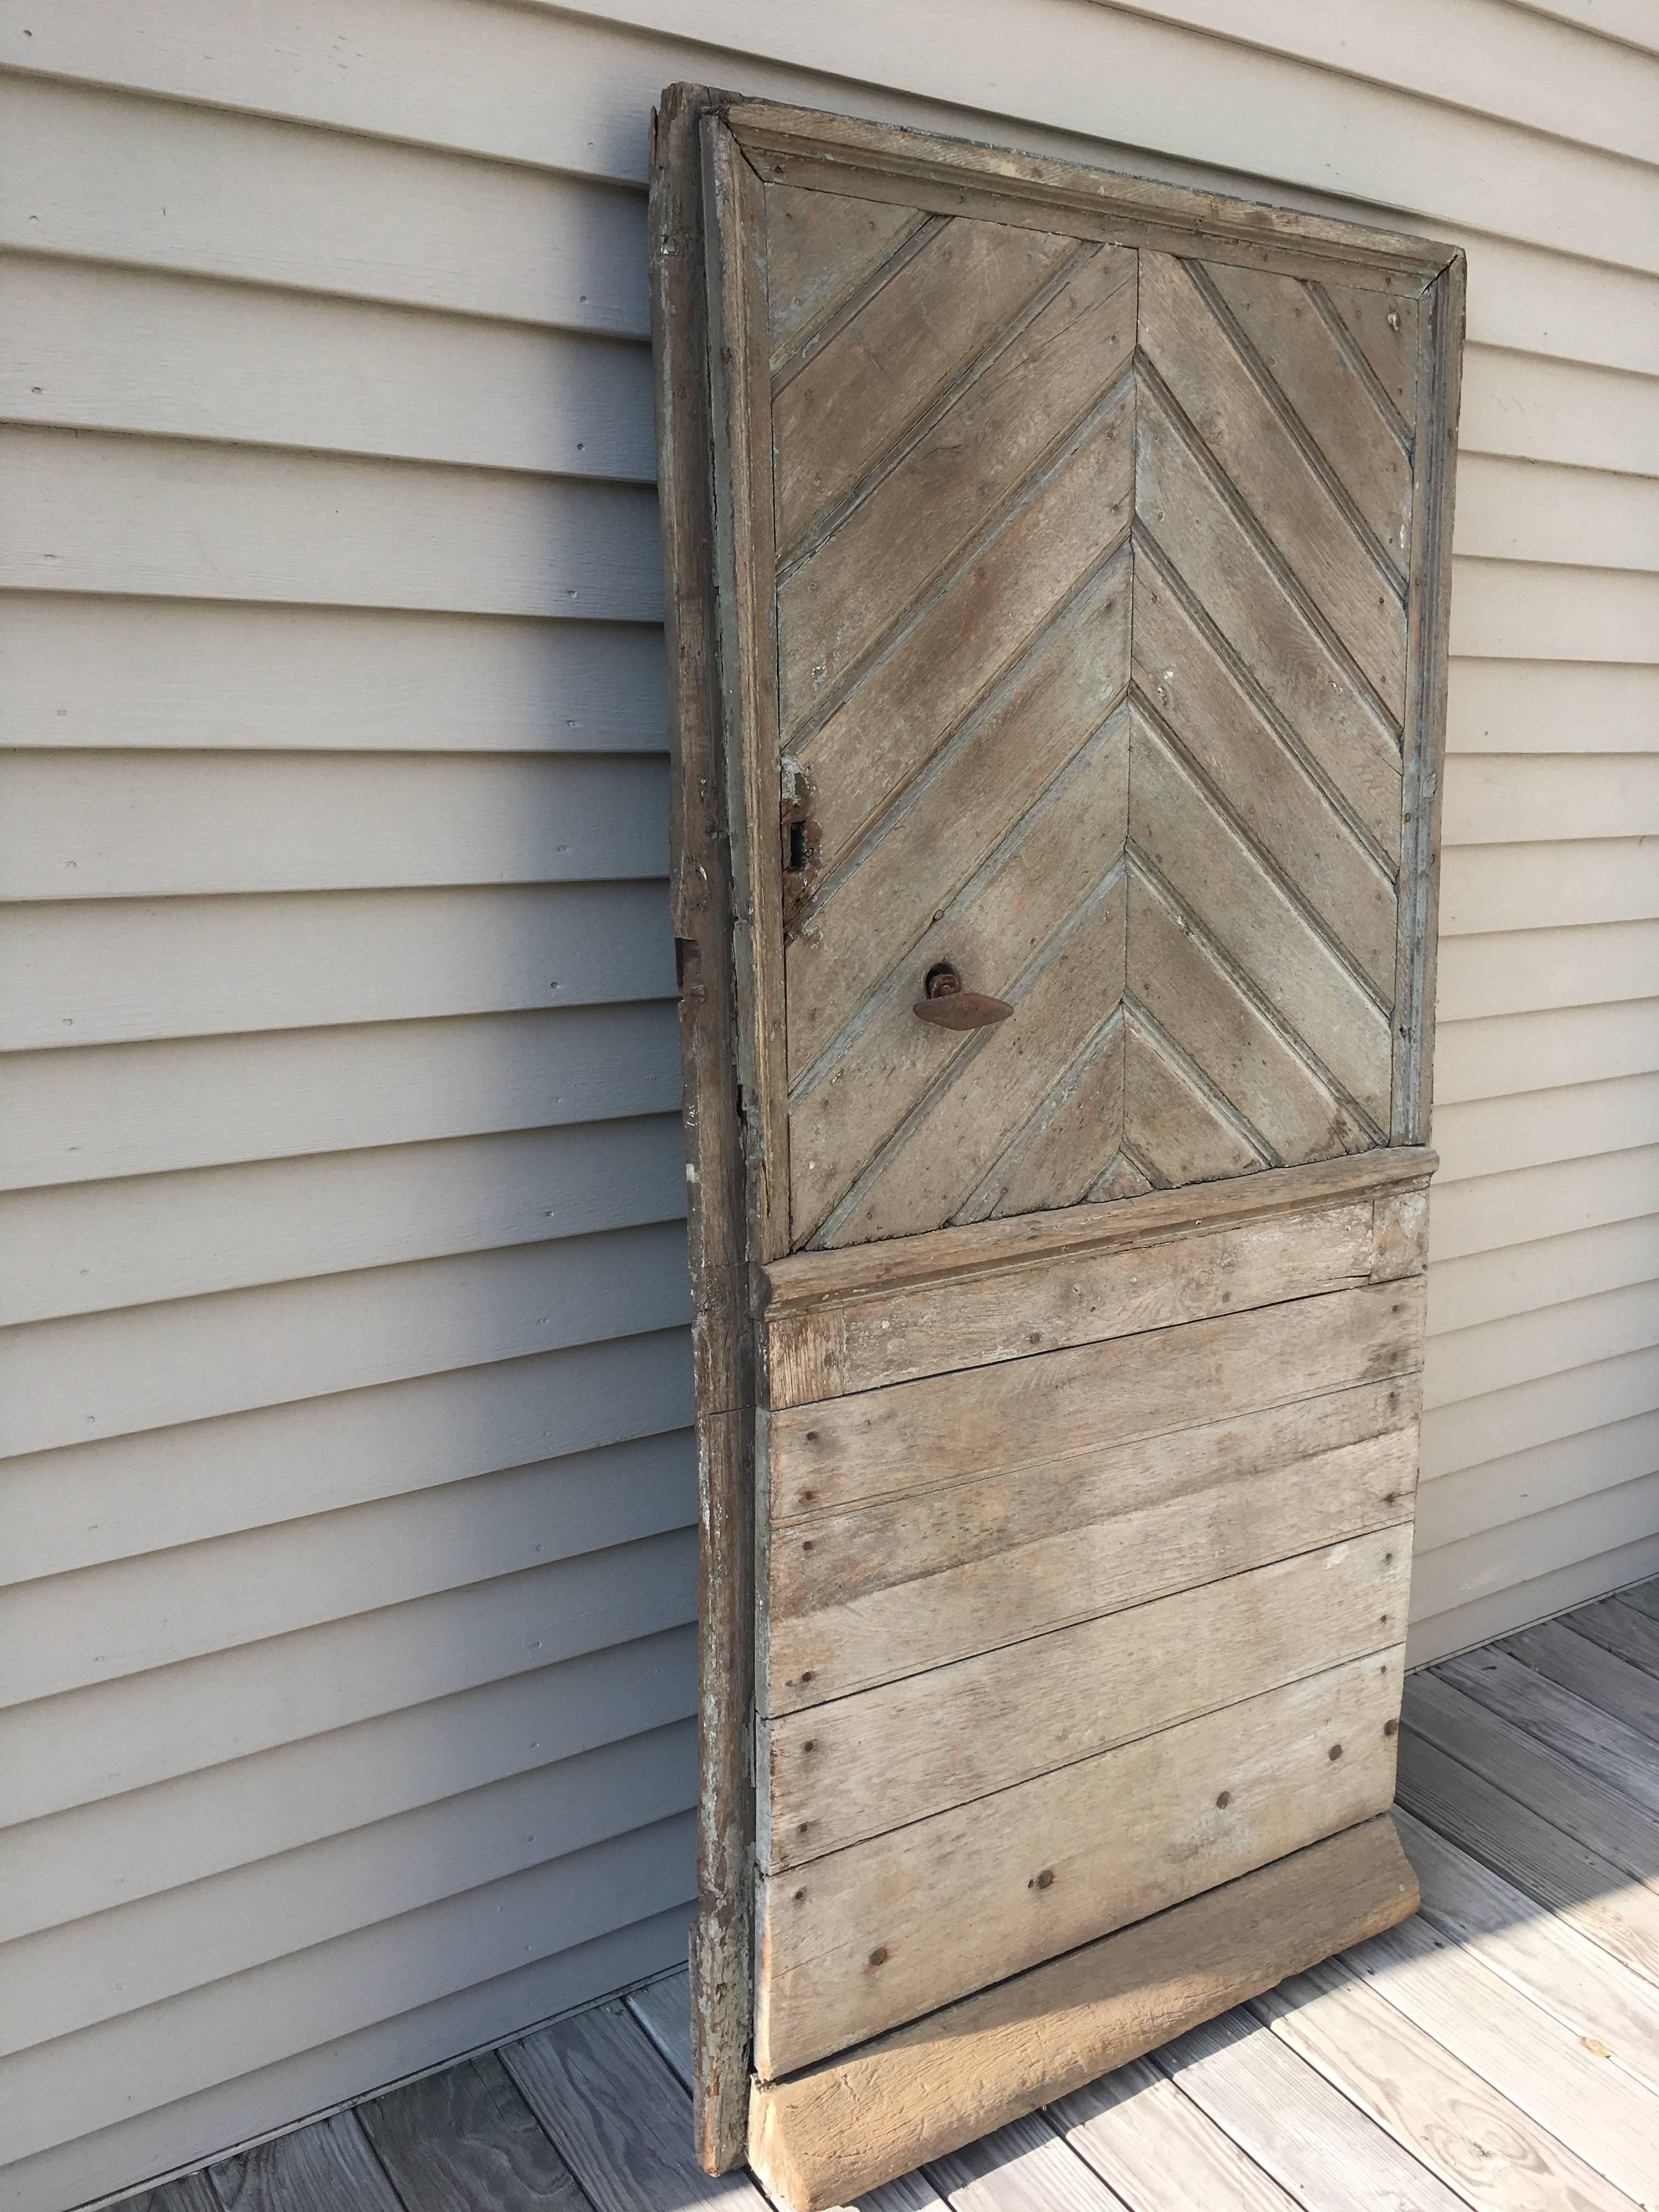 This beautiful and heavy door features a chevron design on its upper half with horizontal studded bottom. With its all original hand-forged strap hinges and handle, it would make a wonderful piece at the entrance to your walled garden or